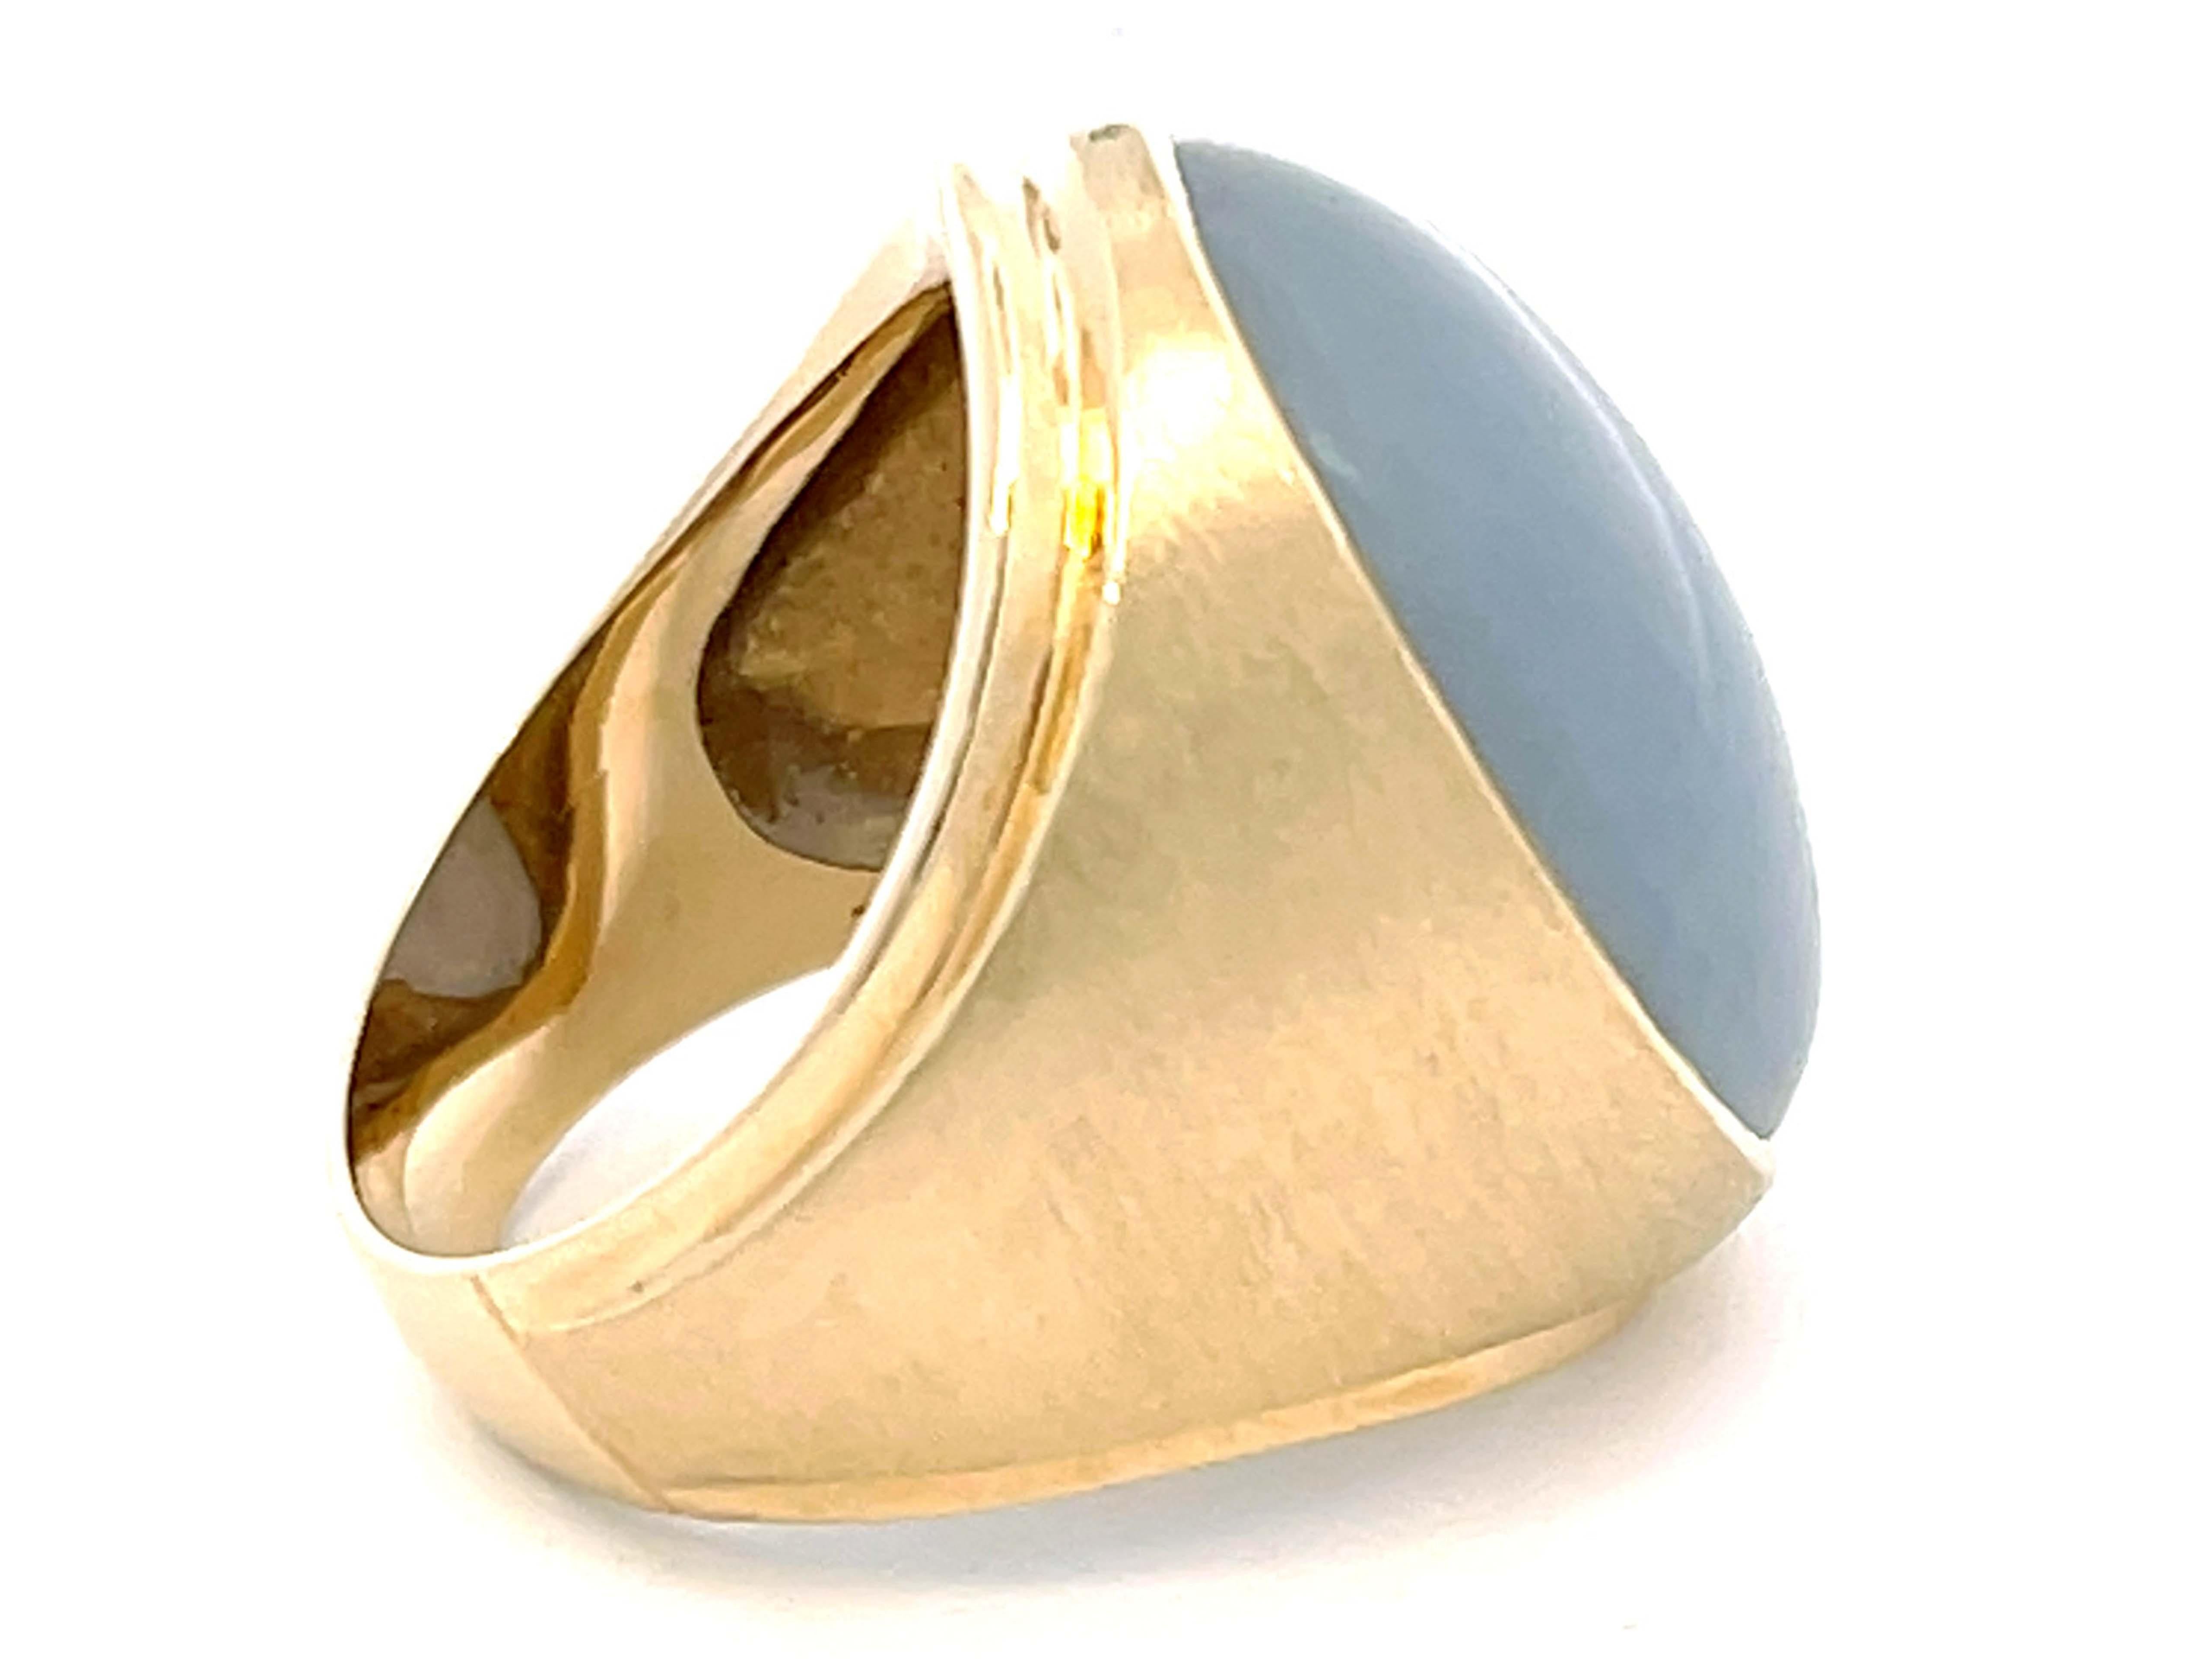 Women's Lavender Oval Cabochon Jade Ring with Satin Finish in 14k Yellow Gold